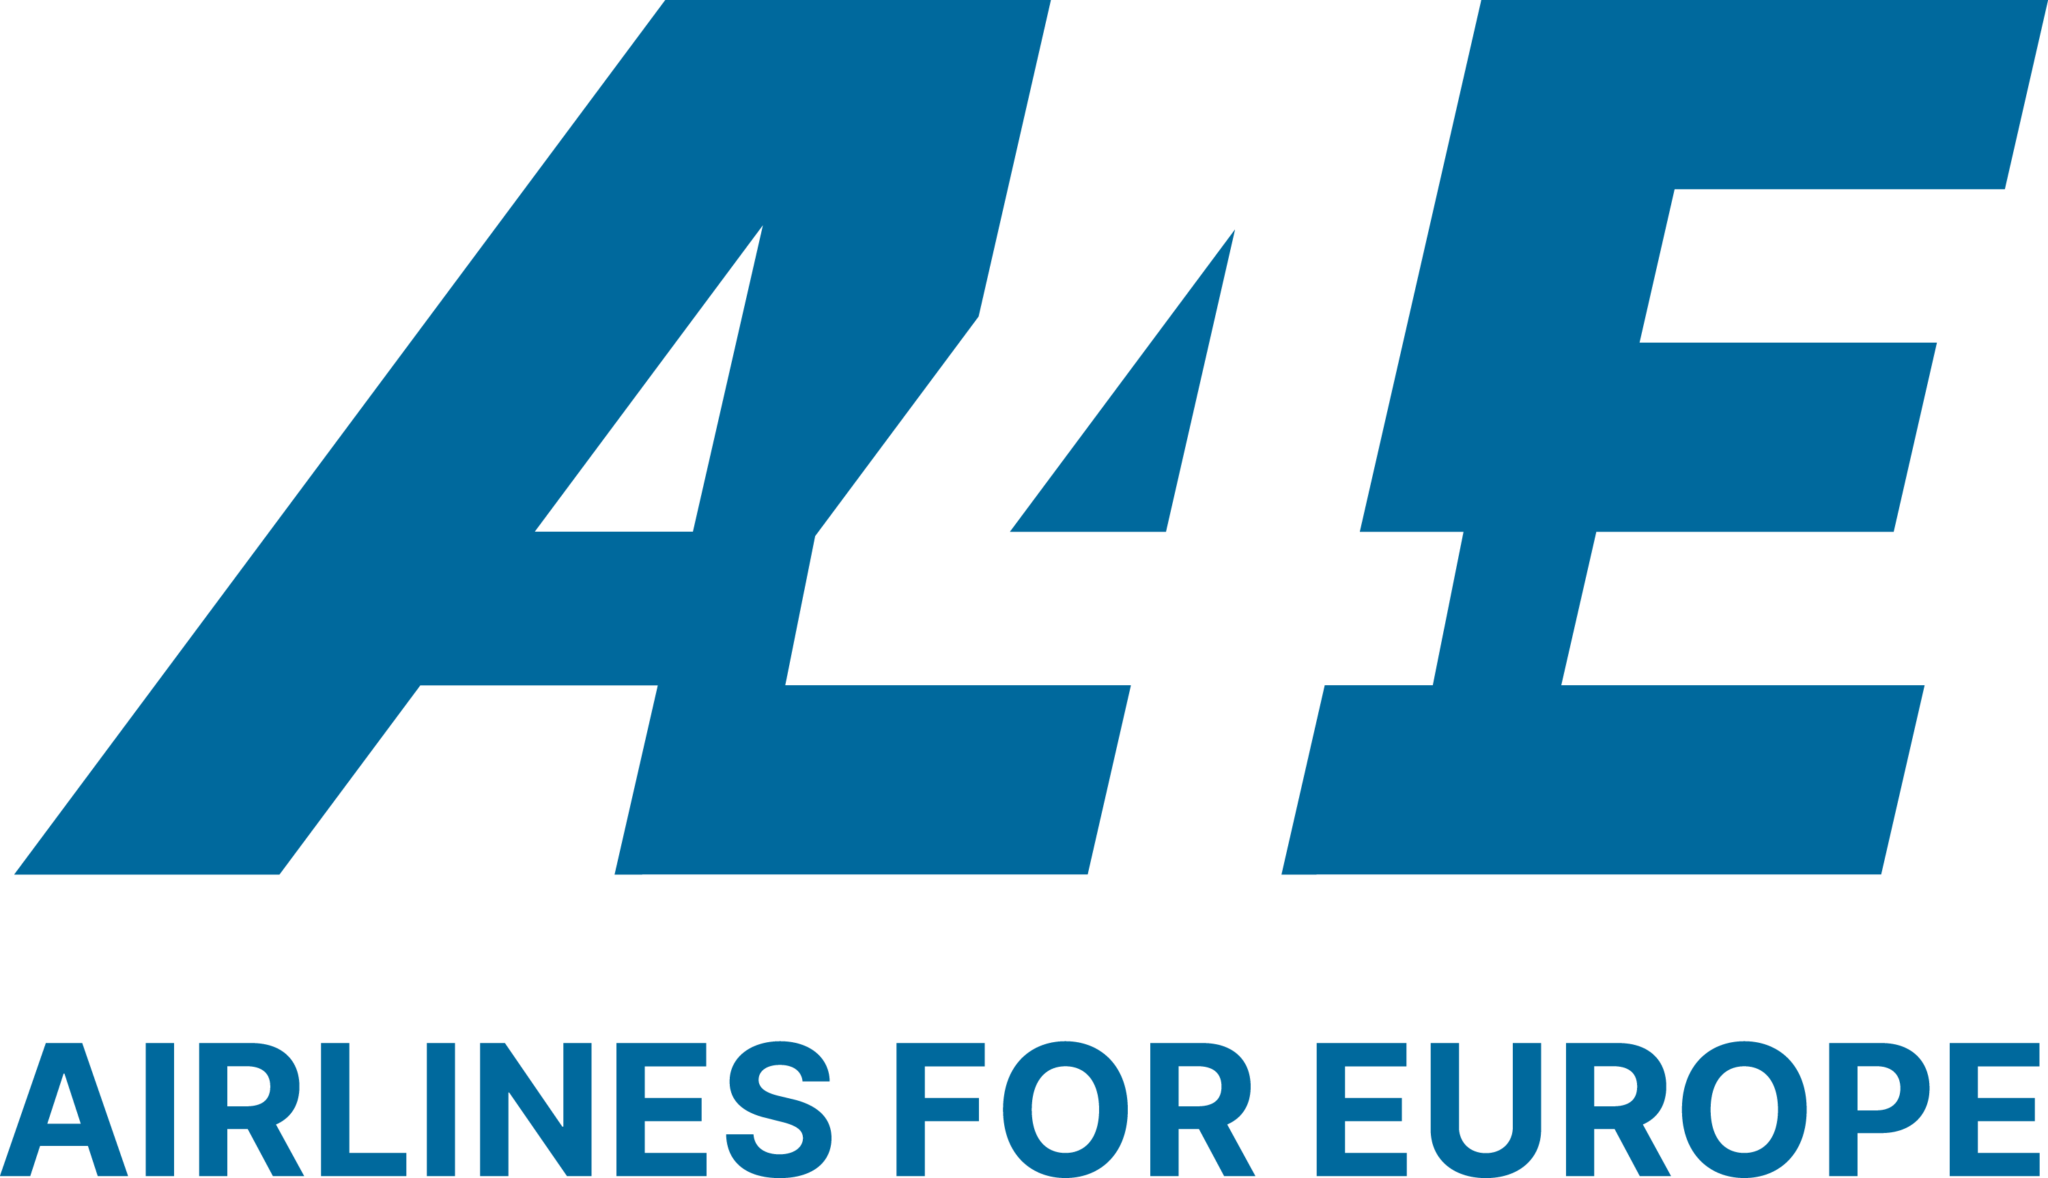 A4E CEOs inject new impetus into airspace reform and call for new ways to finance air traffic management in Europe